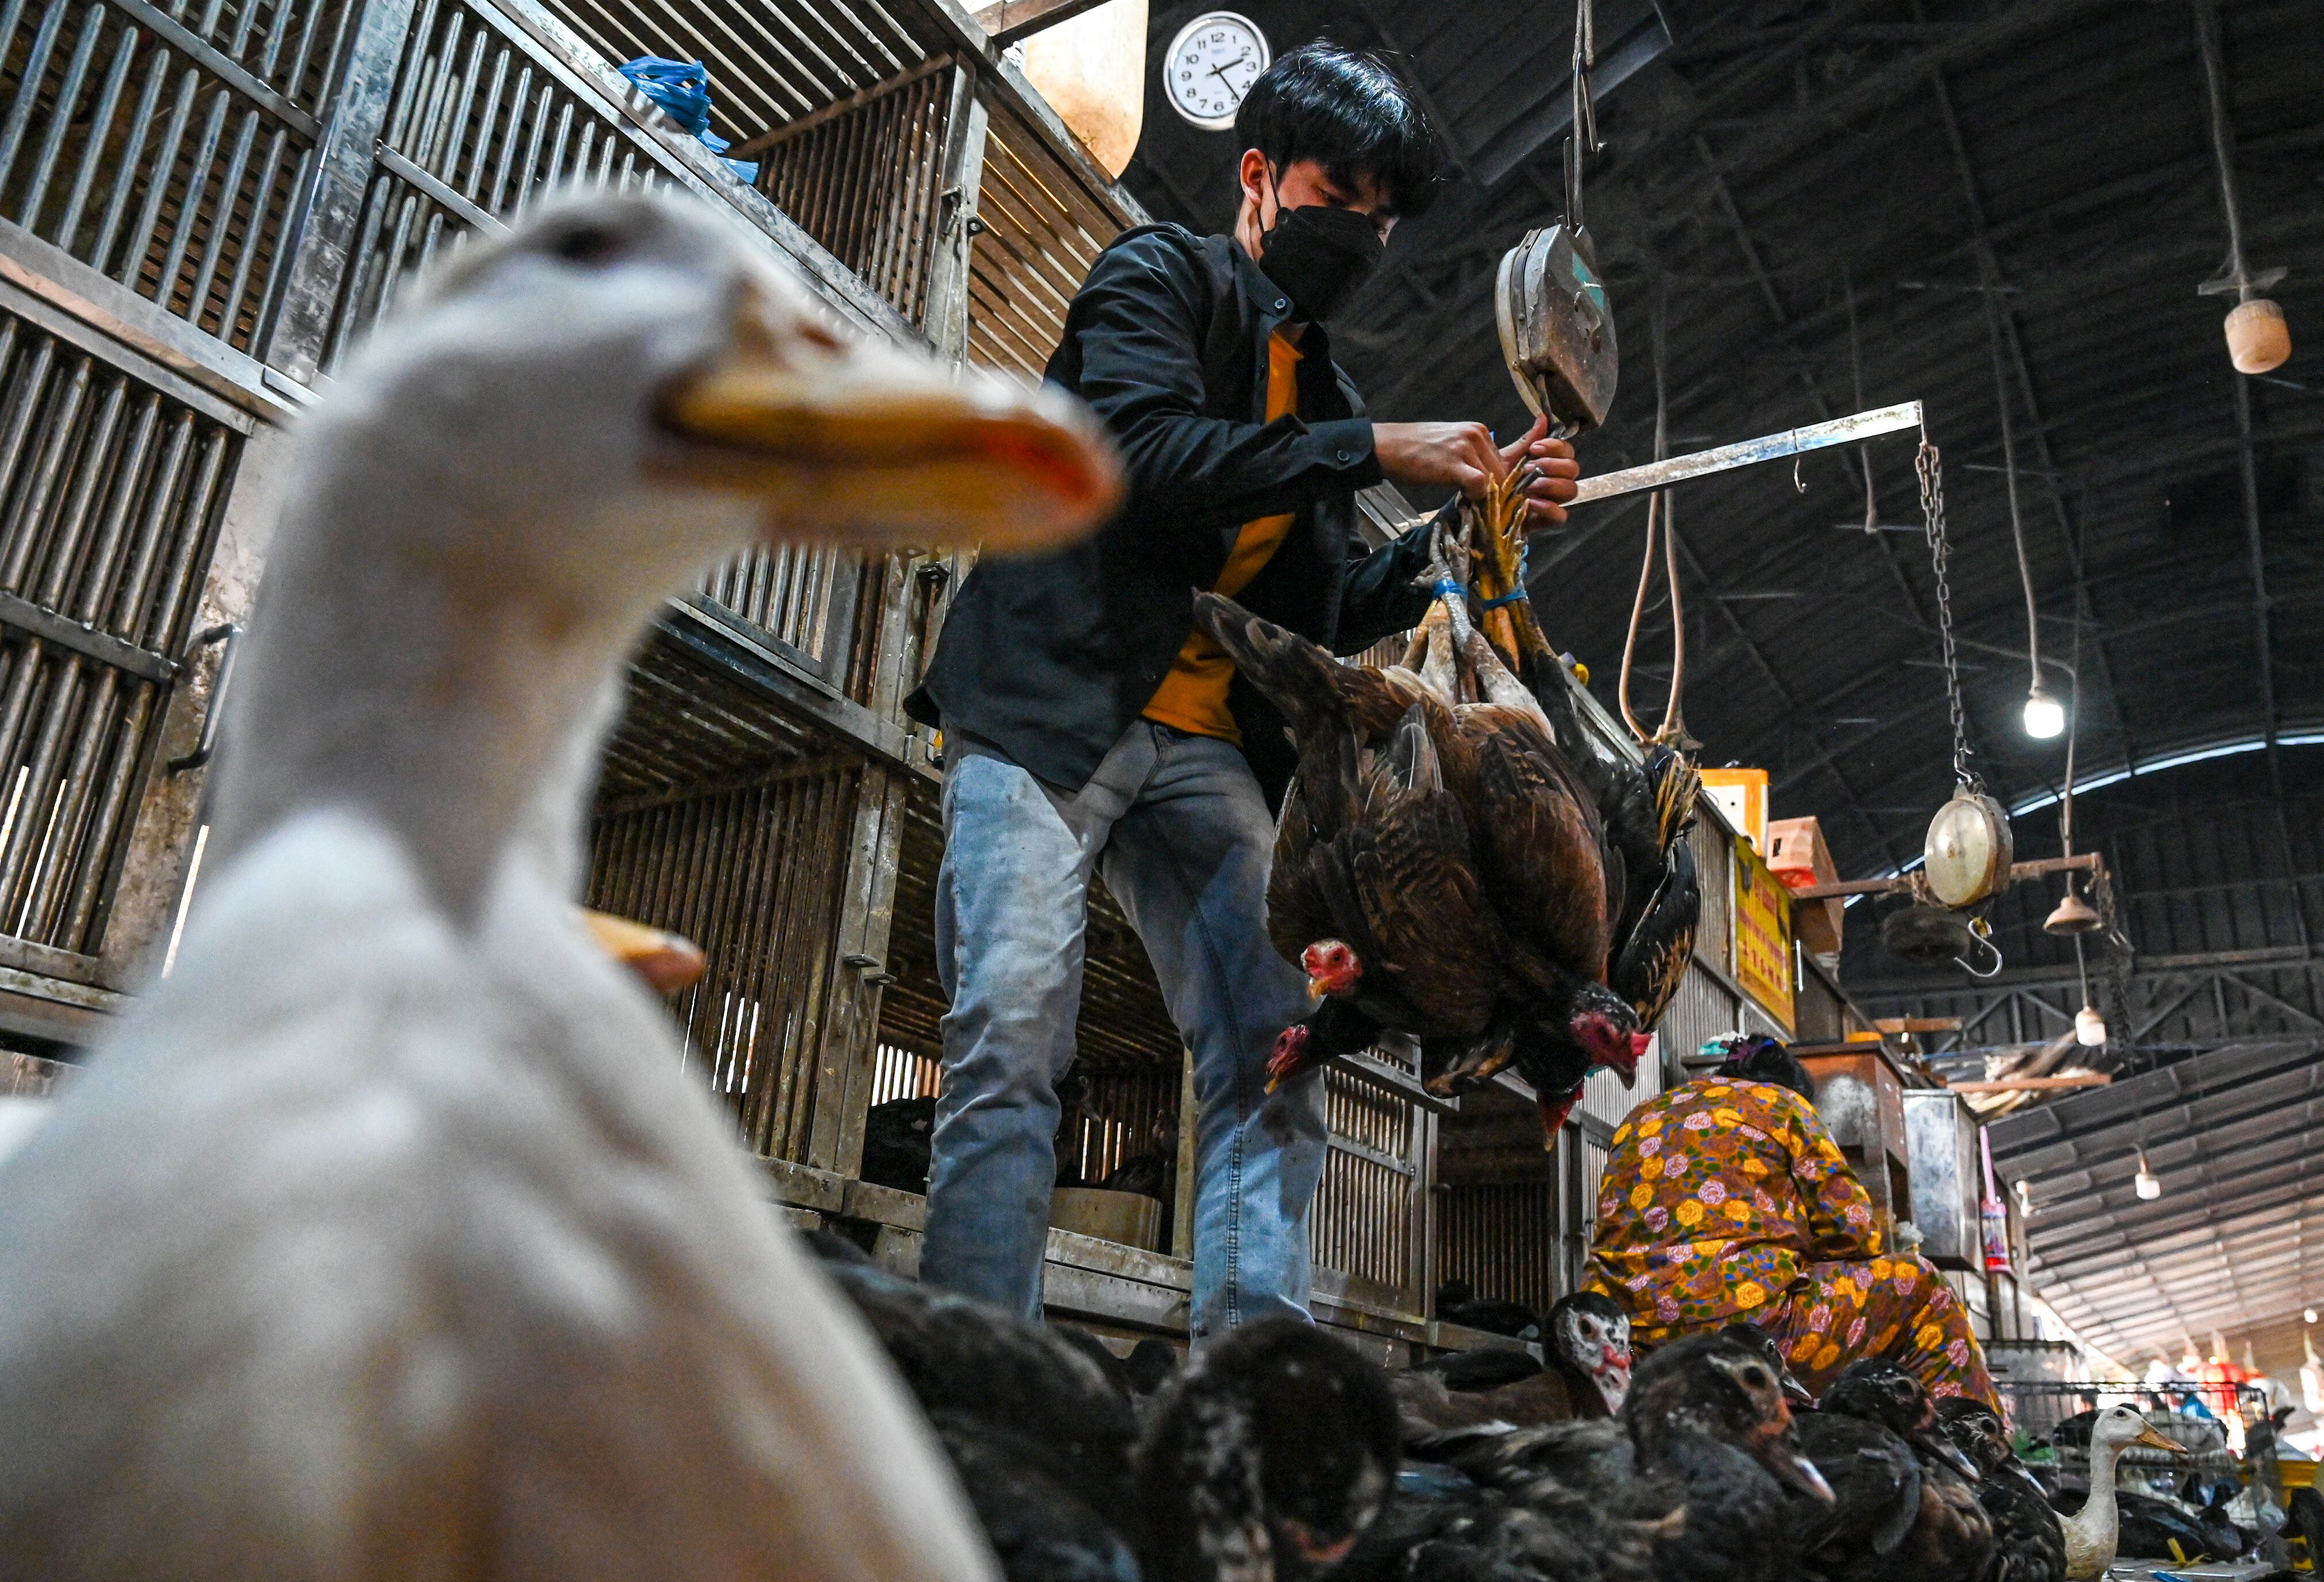 Avian flu may affect the supply of chicken in South America, according to PAHO